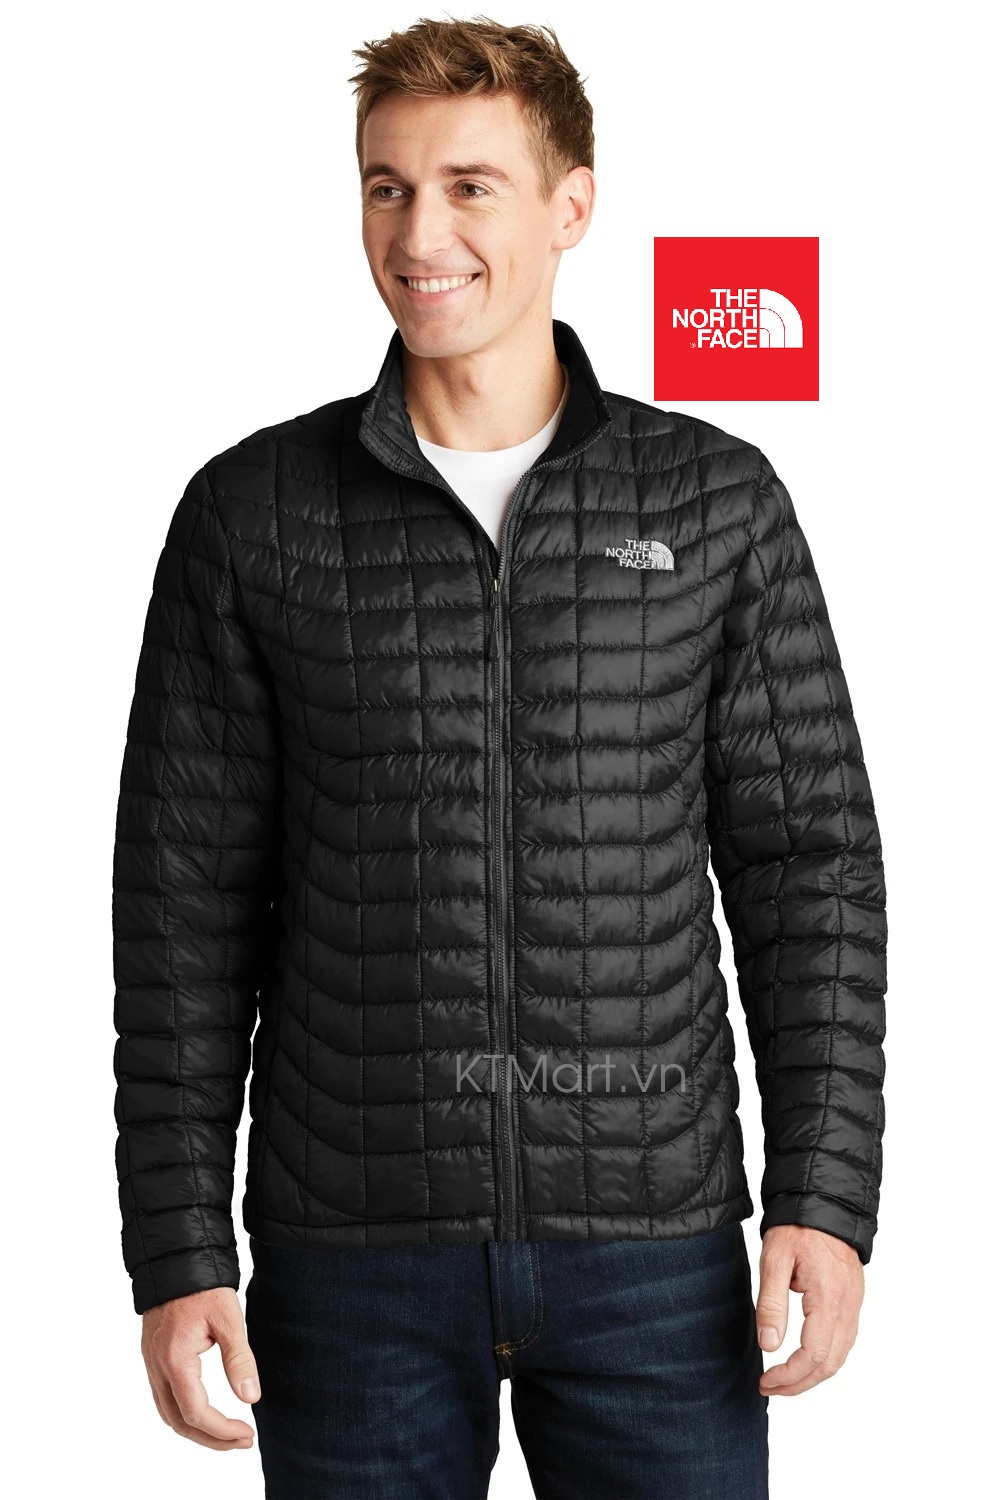 The North Face Men’s Thermoball Full Zip Jacket NF00C762 The North Face size L